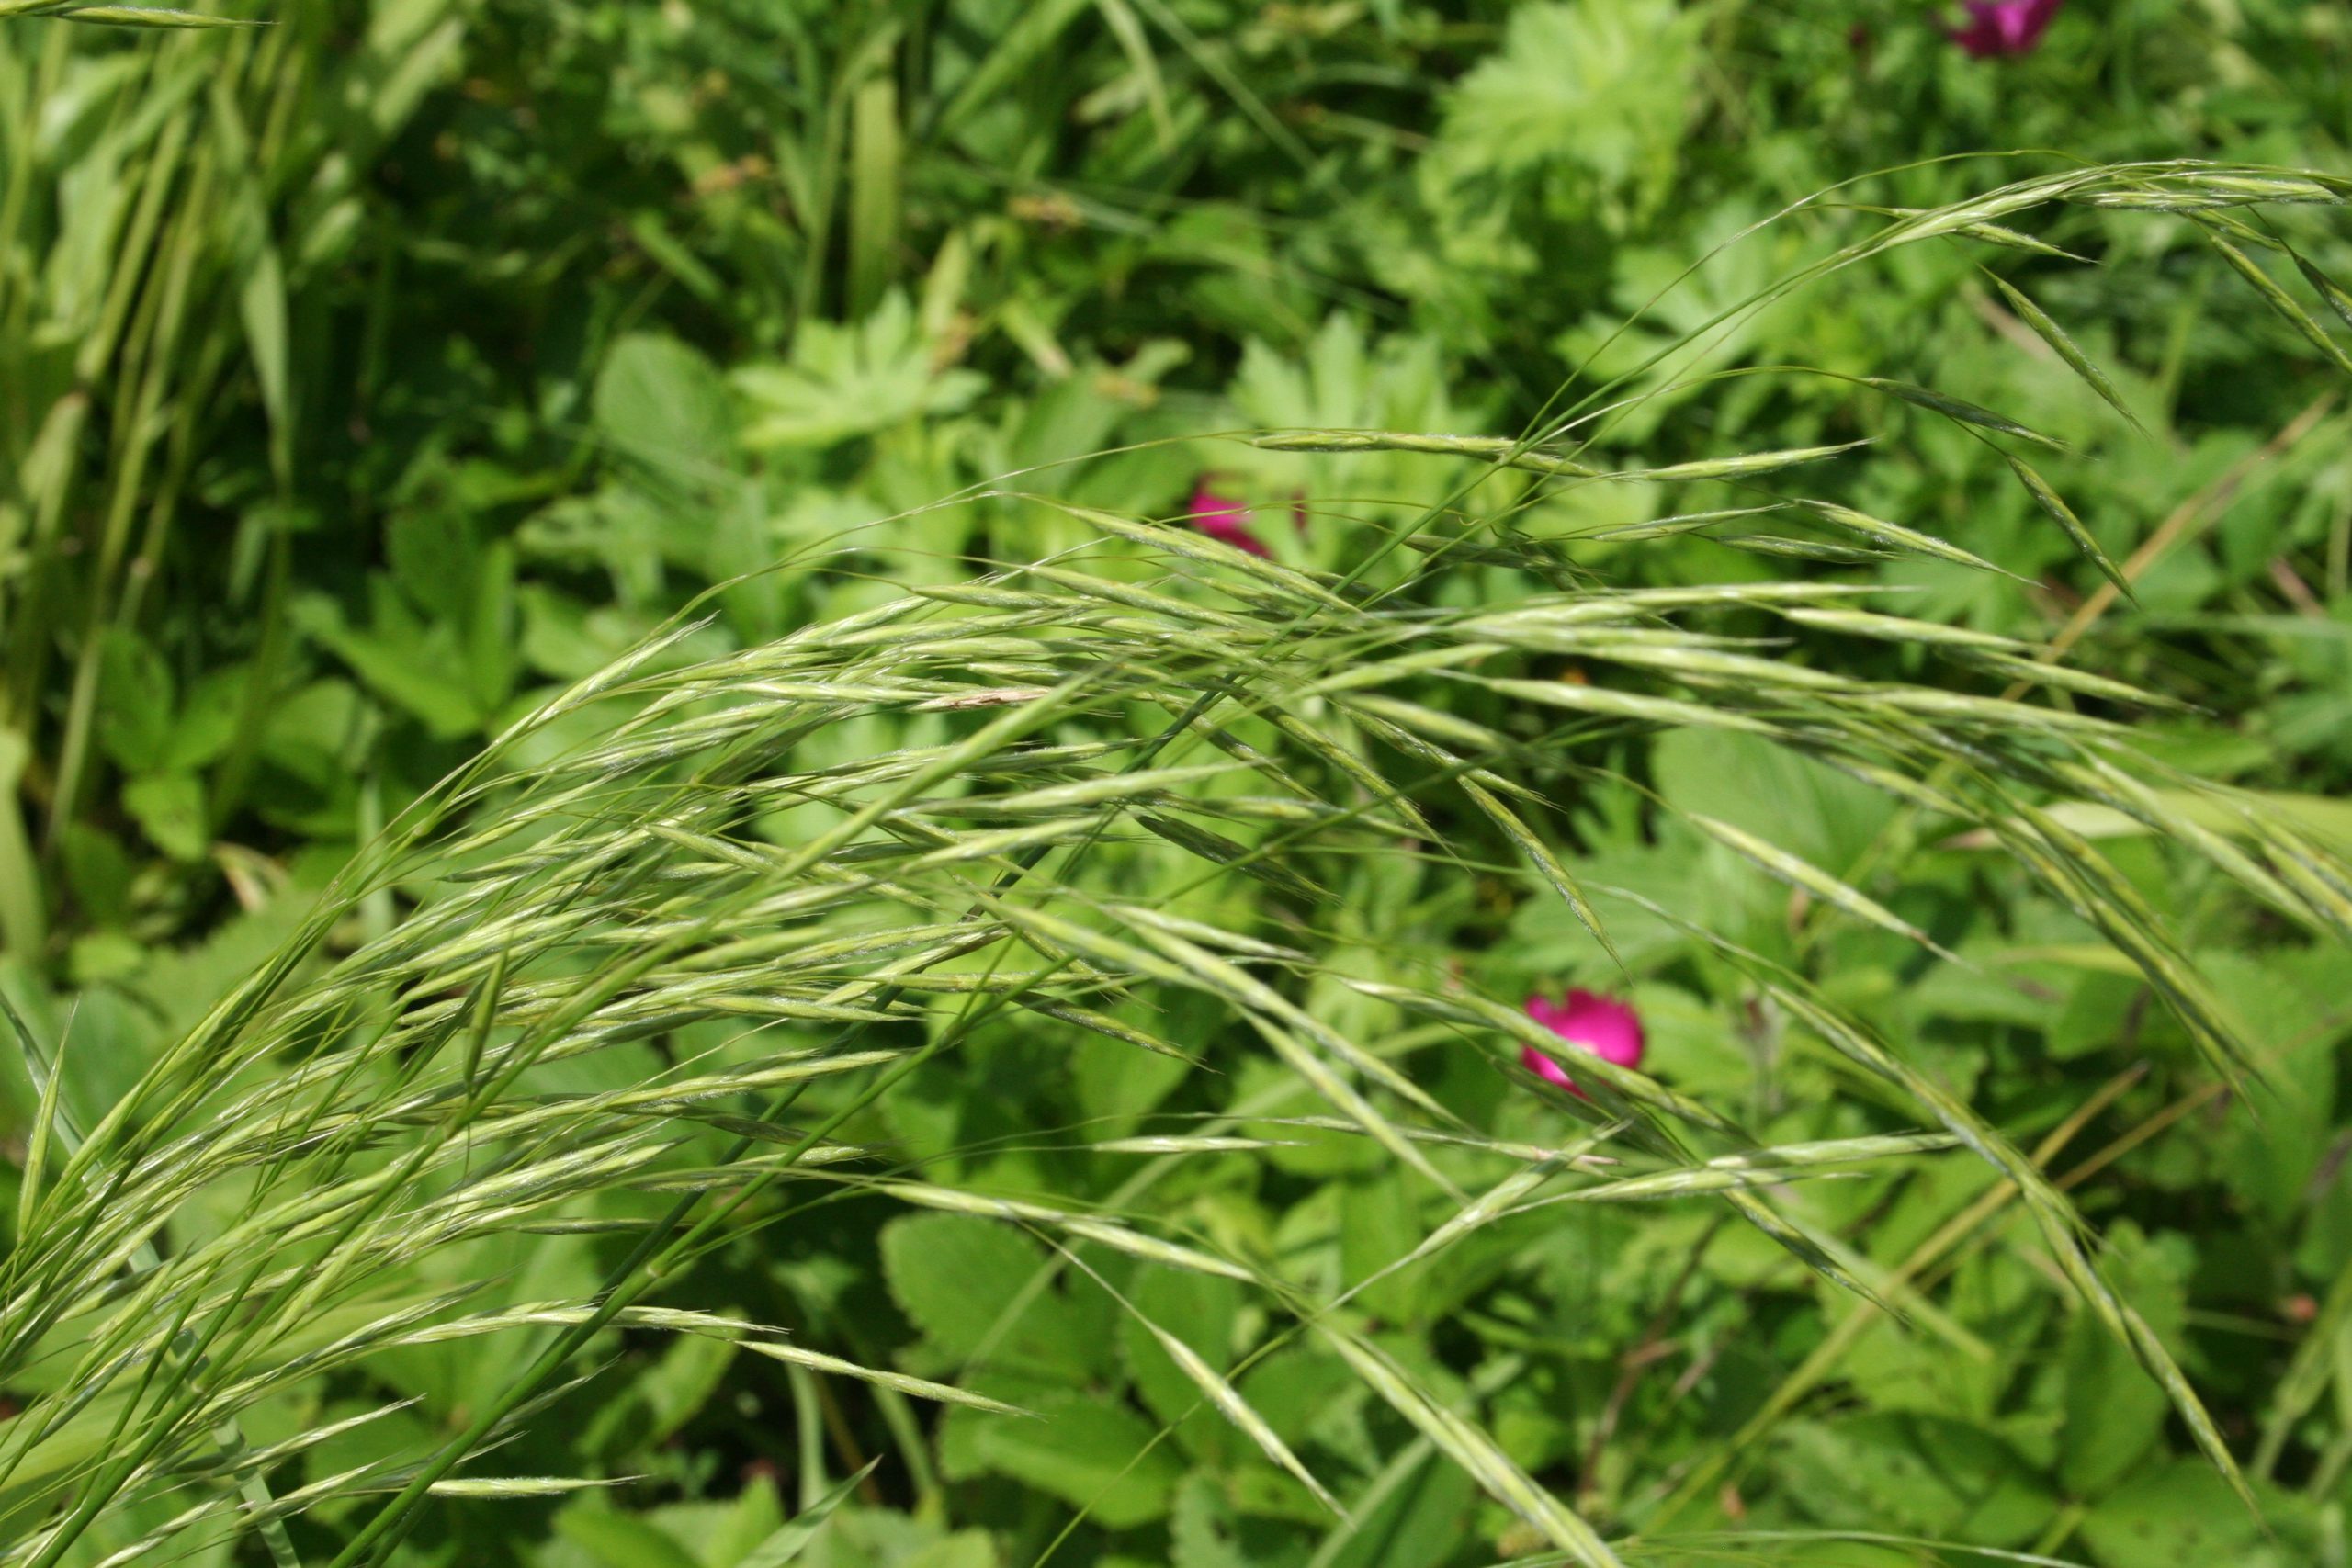 Sow Wild Natives-Hairy Woodland Brome (Bromus pubescens)